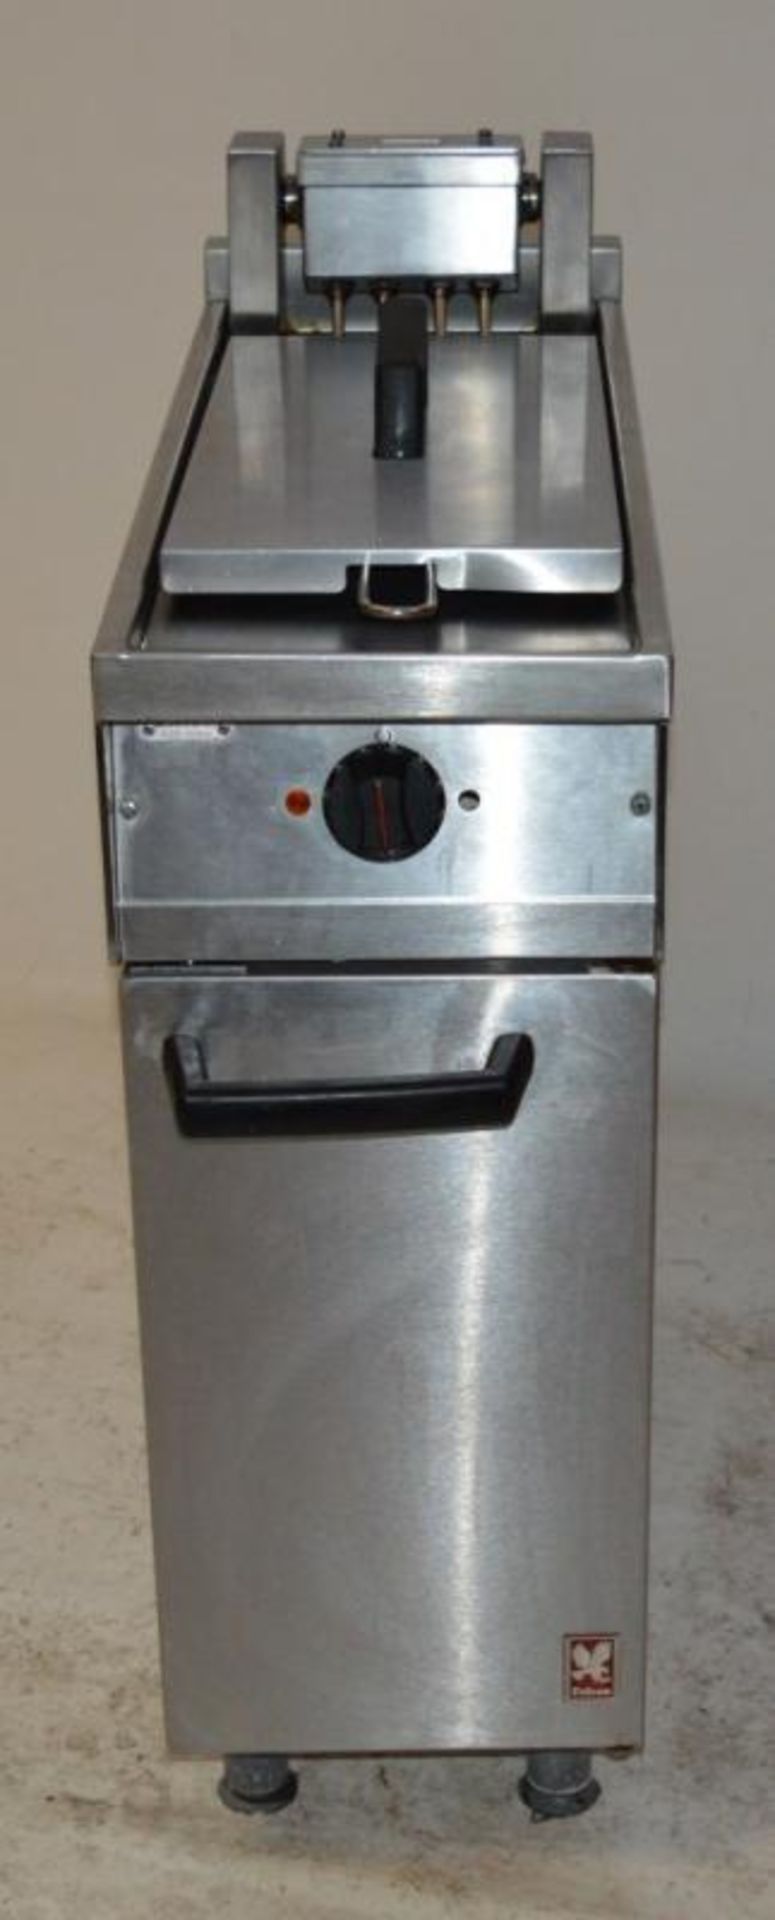 1 x Falcon Dominator E1830 Electric 3 Phase Fryer Cooker - Stainless Steel - H84 x W30 x D77 cms - C - Image 7 of 13